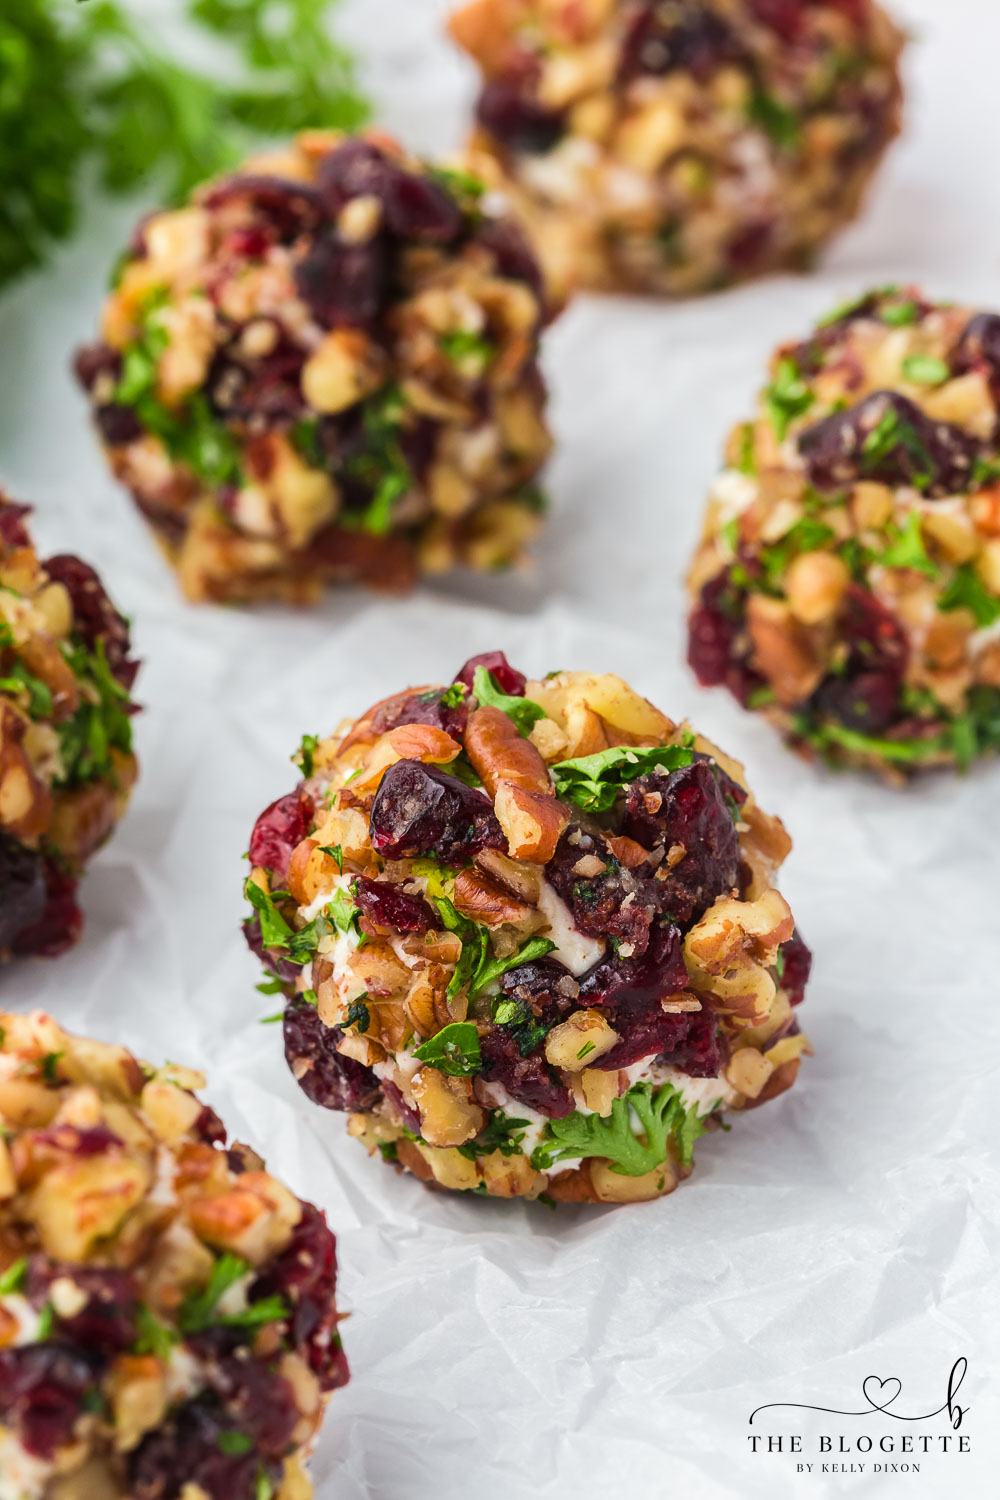 Cranberry Pecan Goat Cheese Balls are festive mini cheese truffles loaded with creamy goat cheese, sweet cranberries, and crunchy pecans!